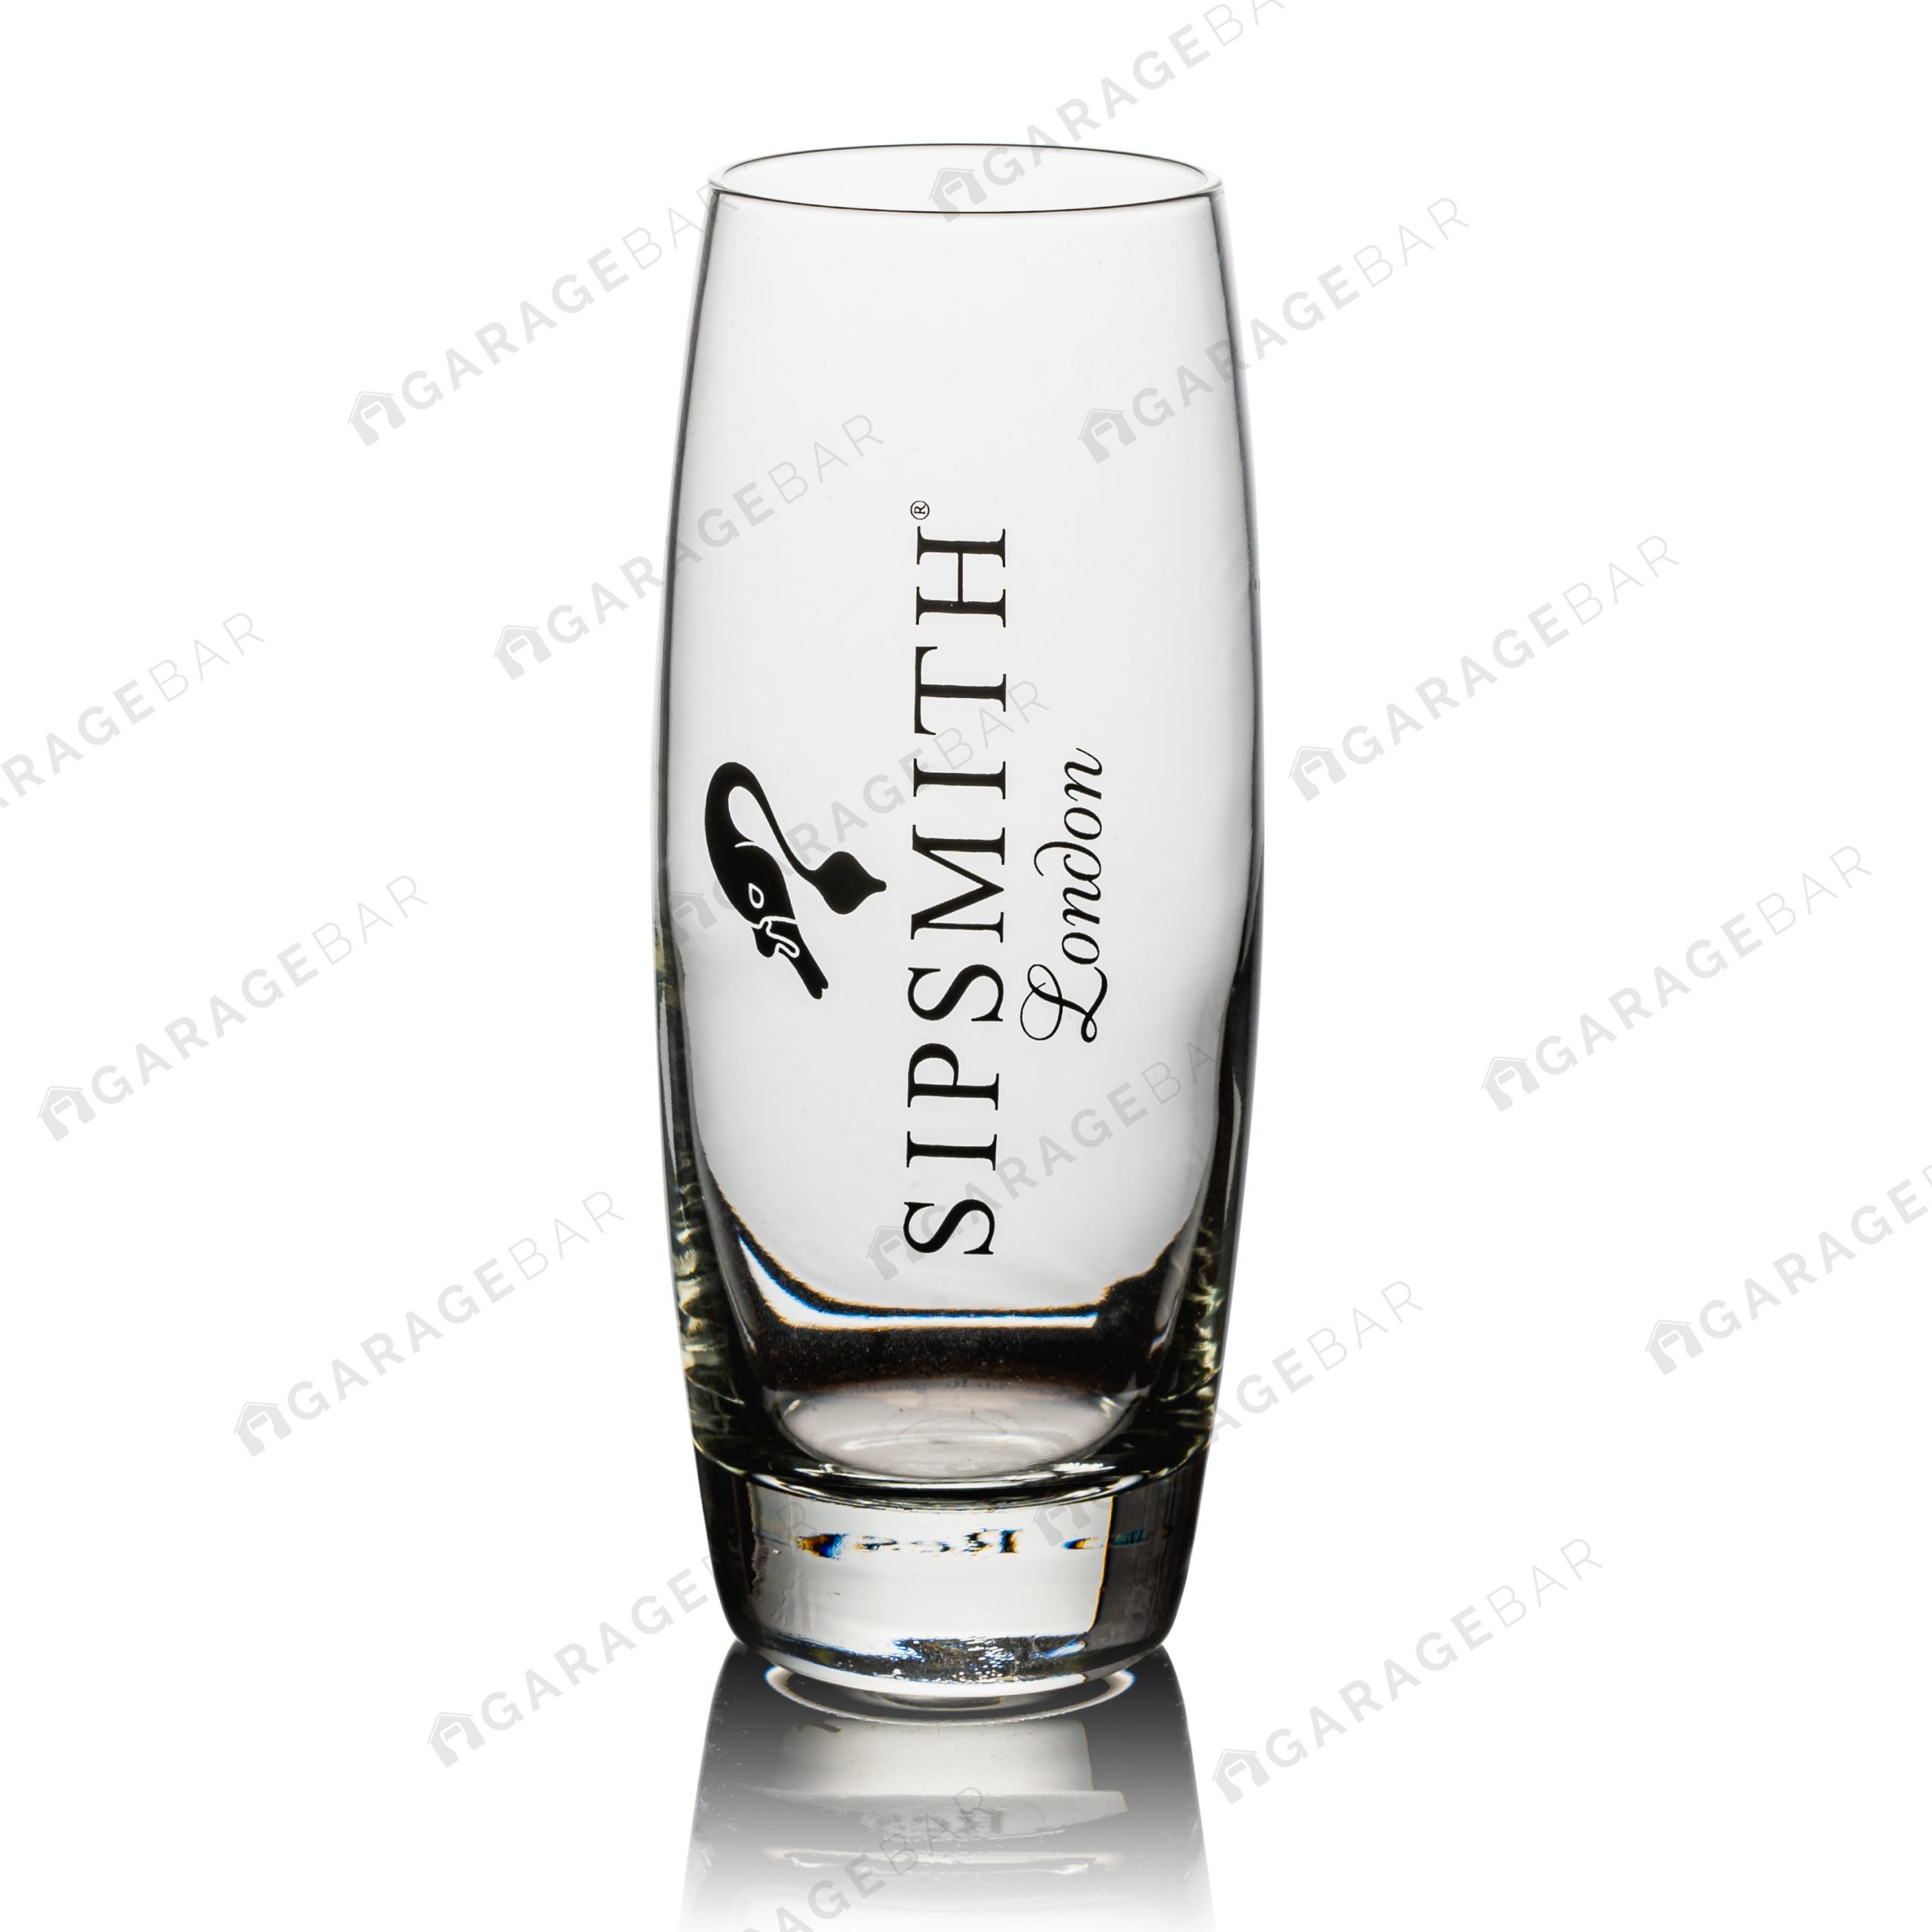 Sipsmith Gin Glass